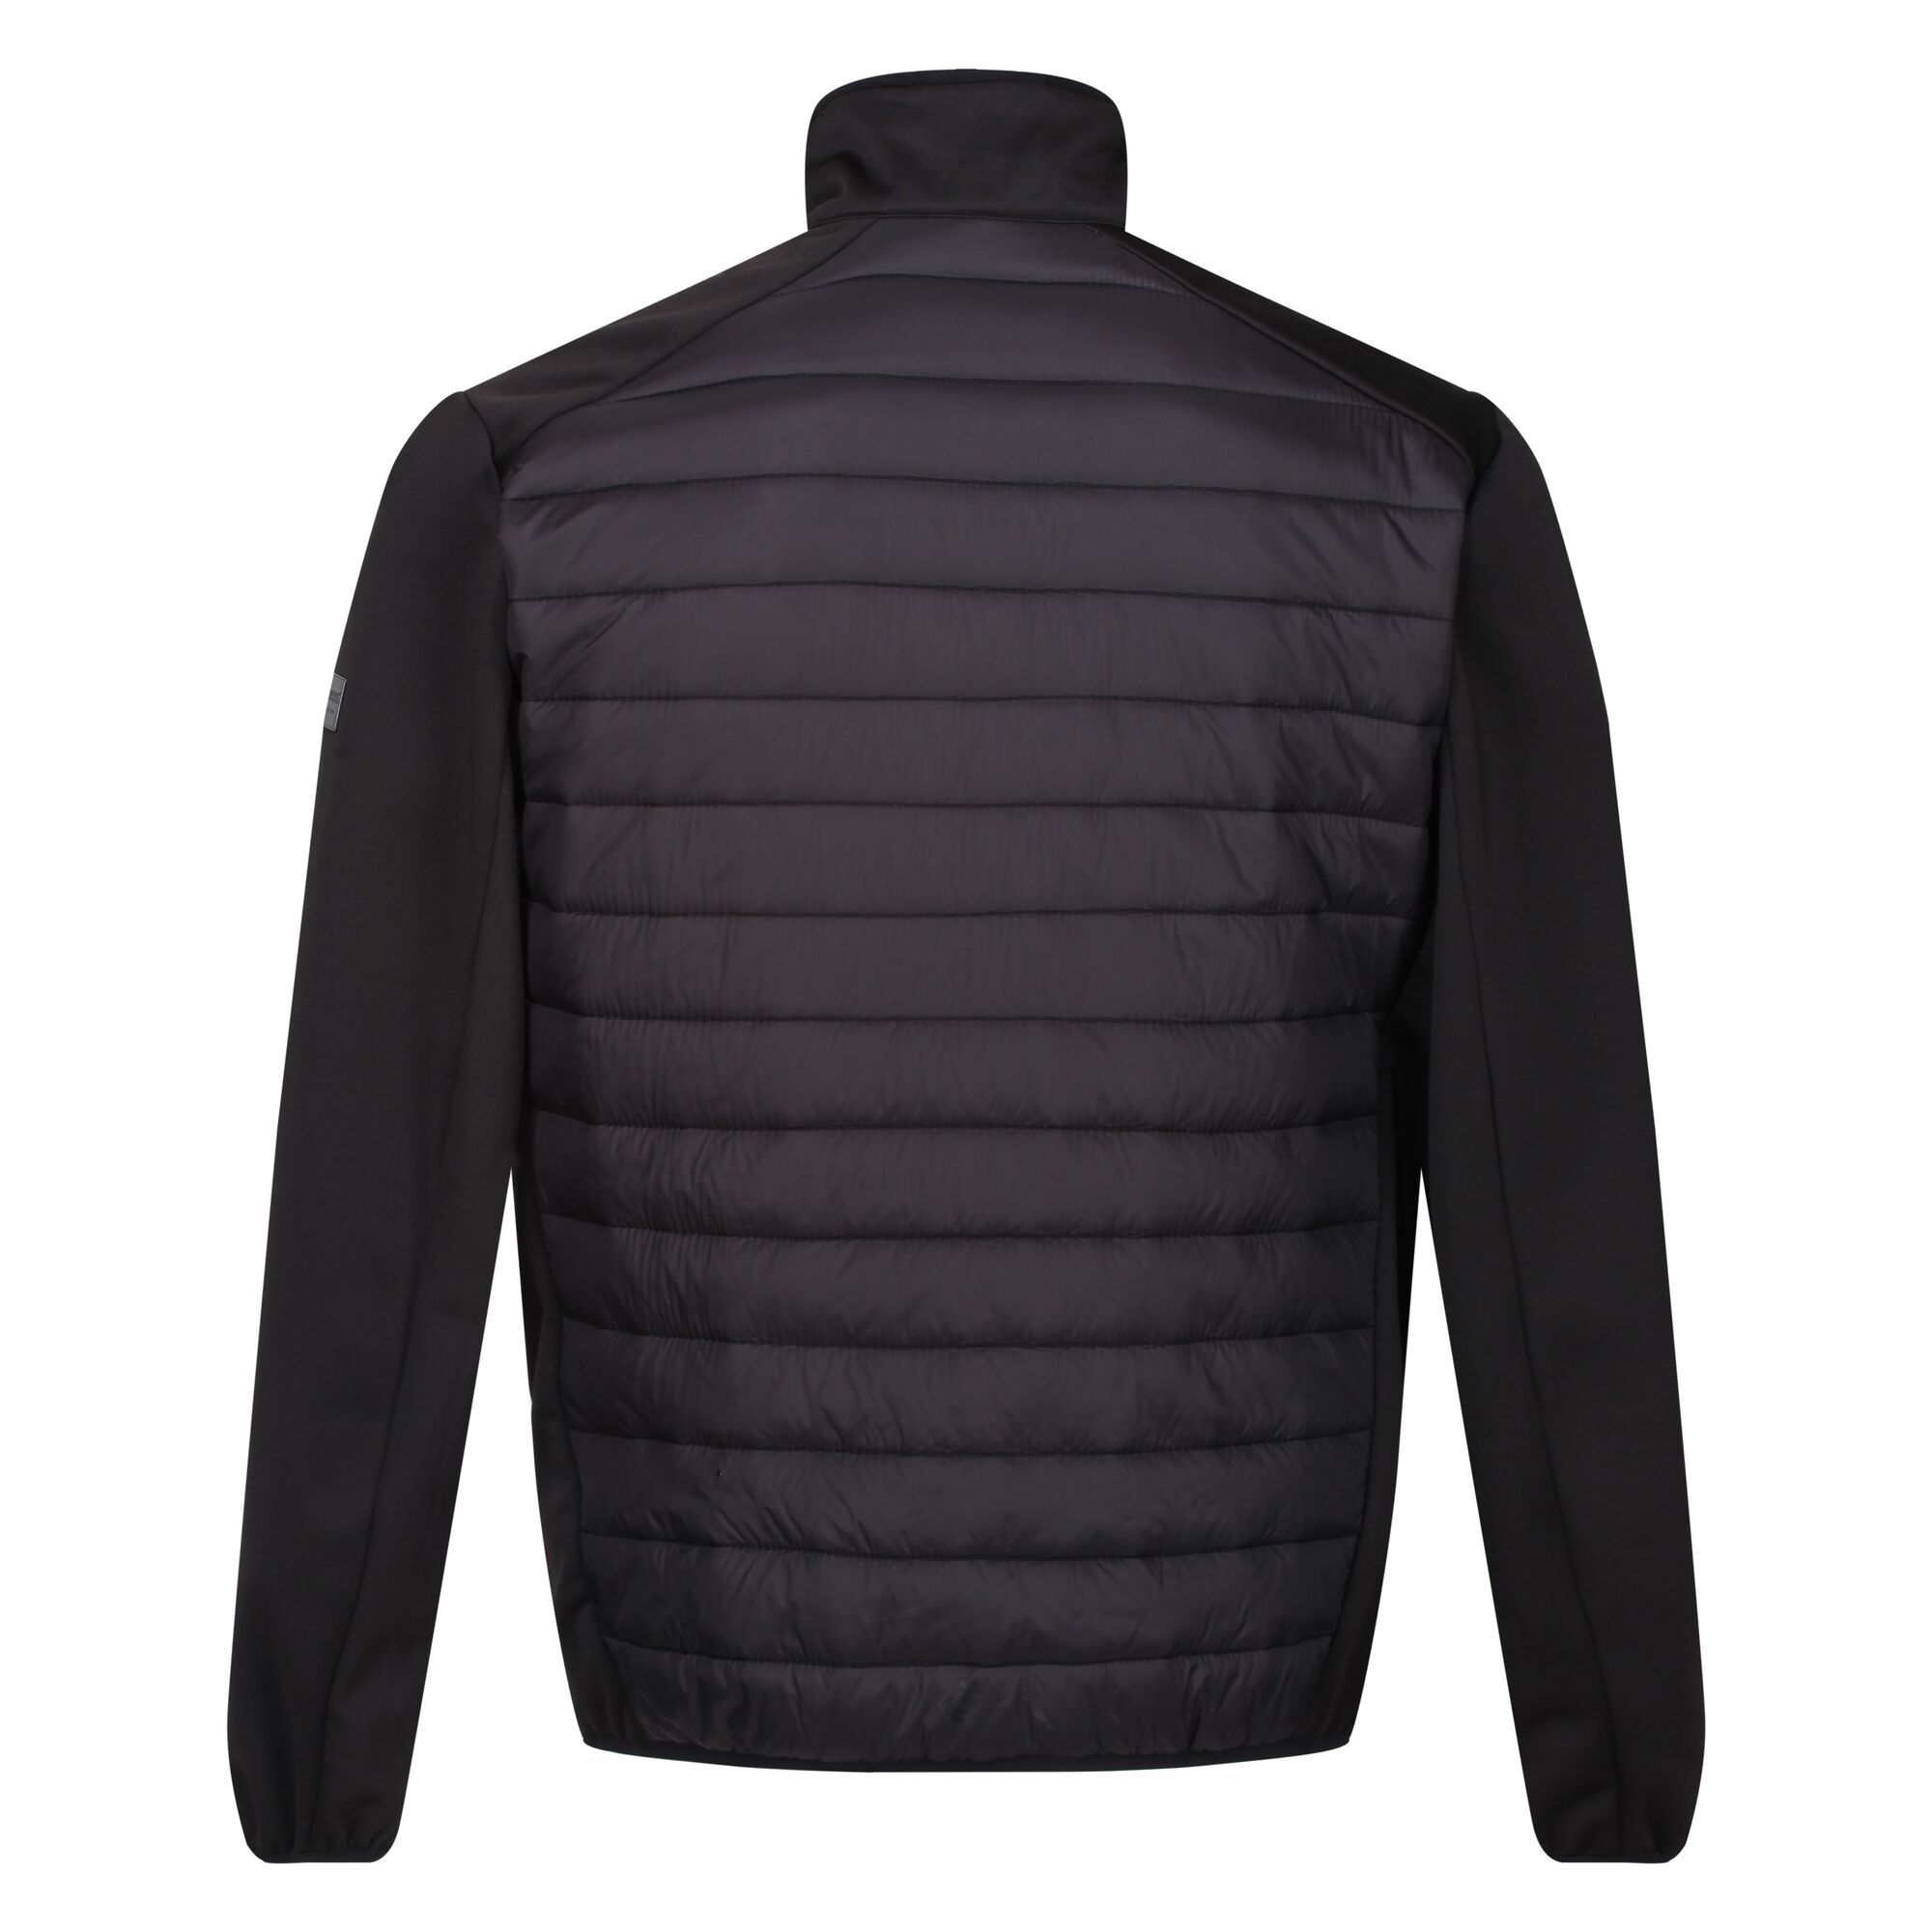 Material: 100% Polyamide. Fabric: Extol Stretch, Knitted, Warmloft. 235gsm. Design: Quilted. Compressible, Stretch Binding. Fabric Technology: Water Repellent. Neckline: High-Neck. Sleeve-Type: Long-Sleeved. Cuff: Stretch. Pockets: 2 Zip Pockets. Fastening: Full Zip, Zip Guard.